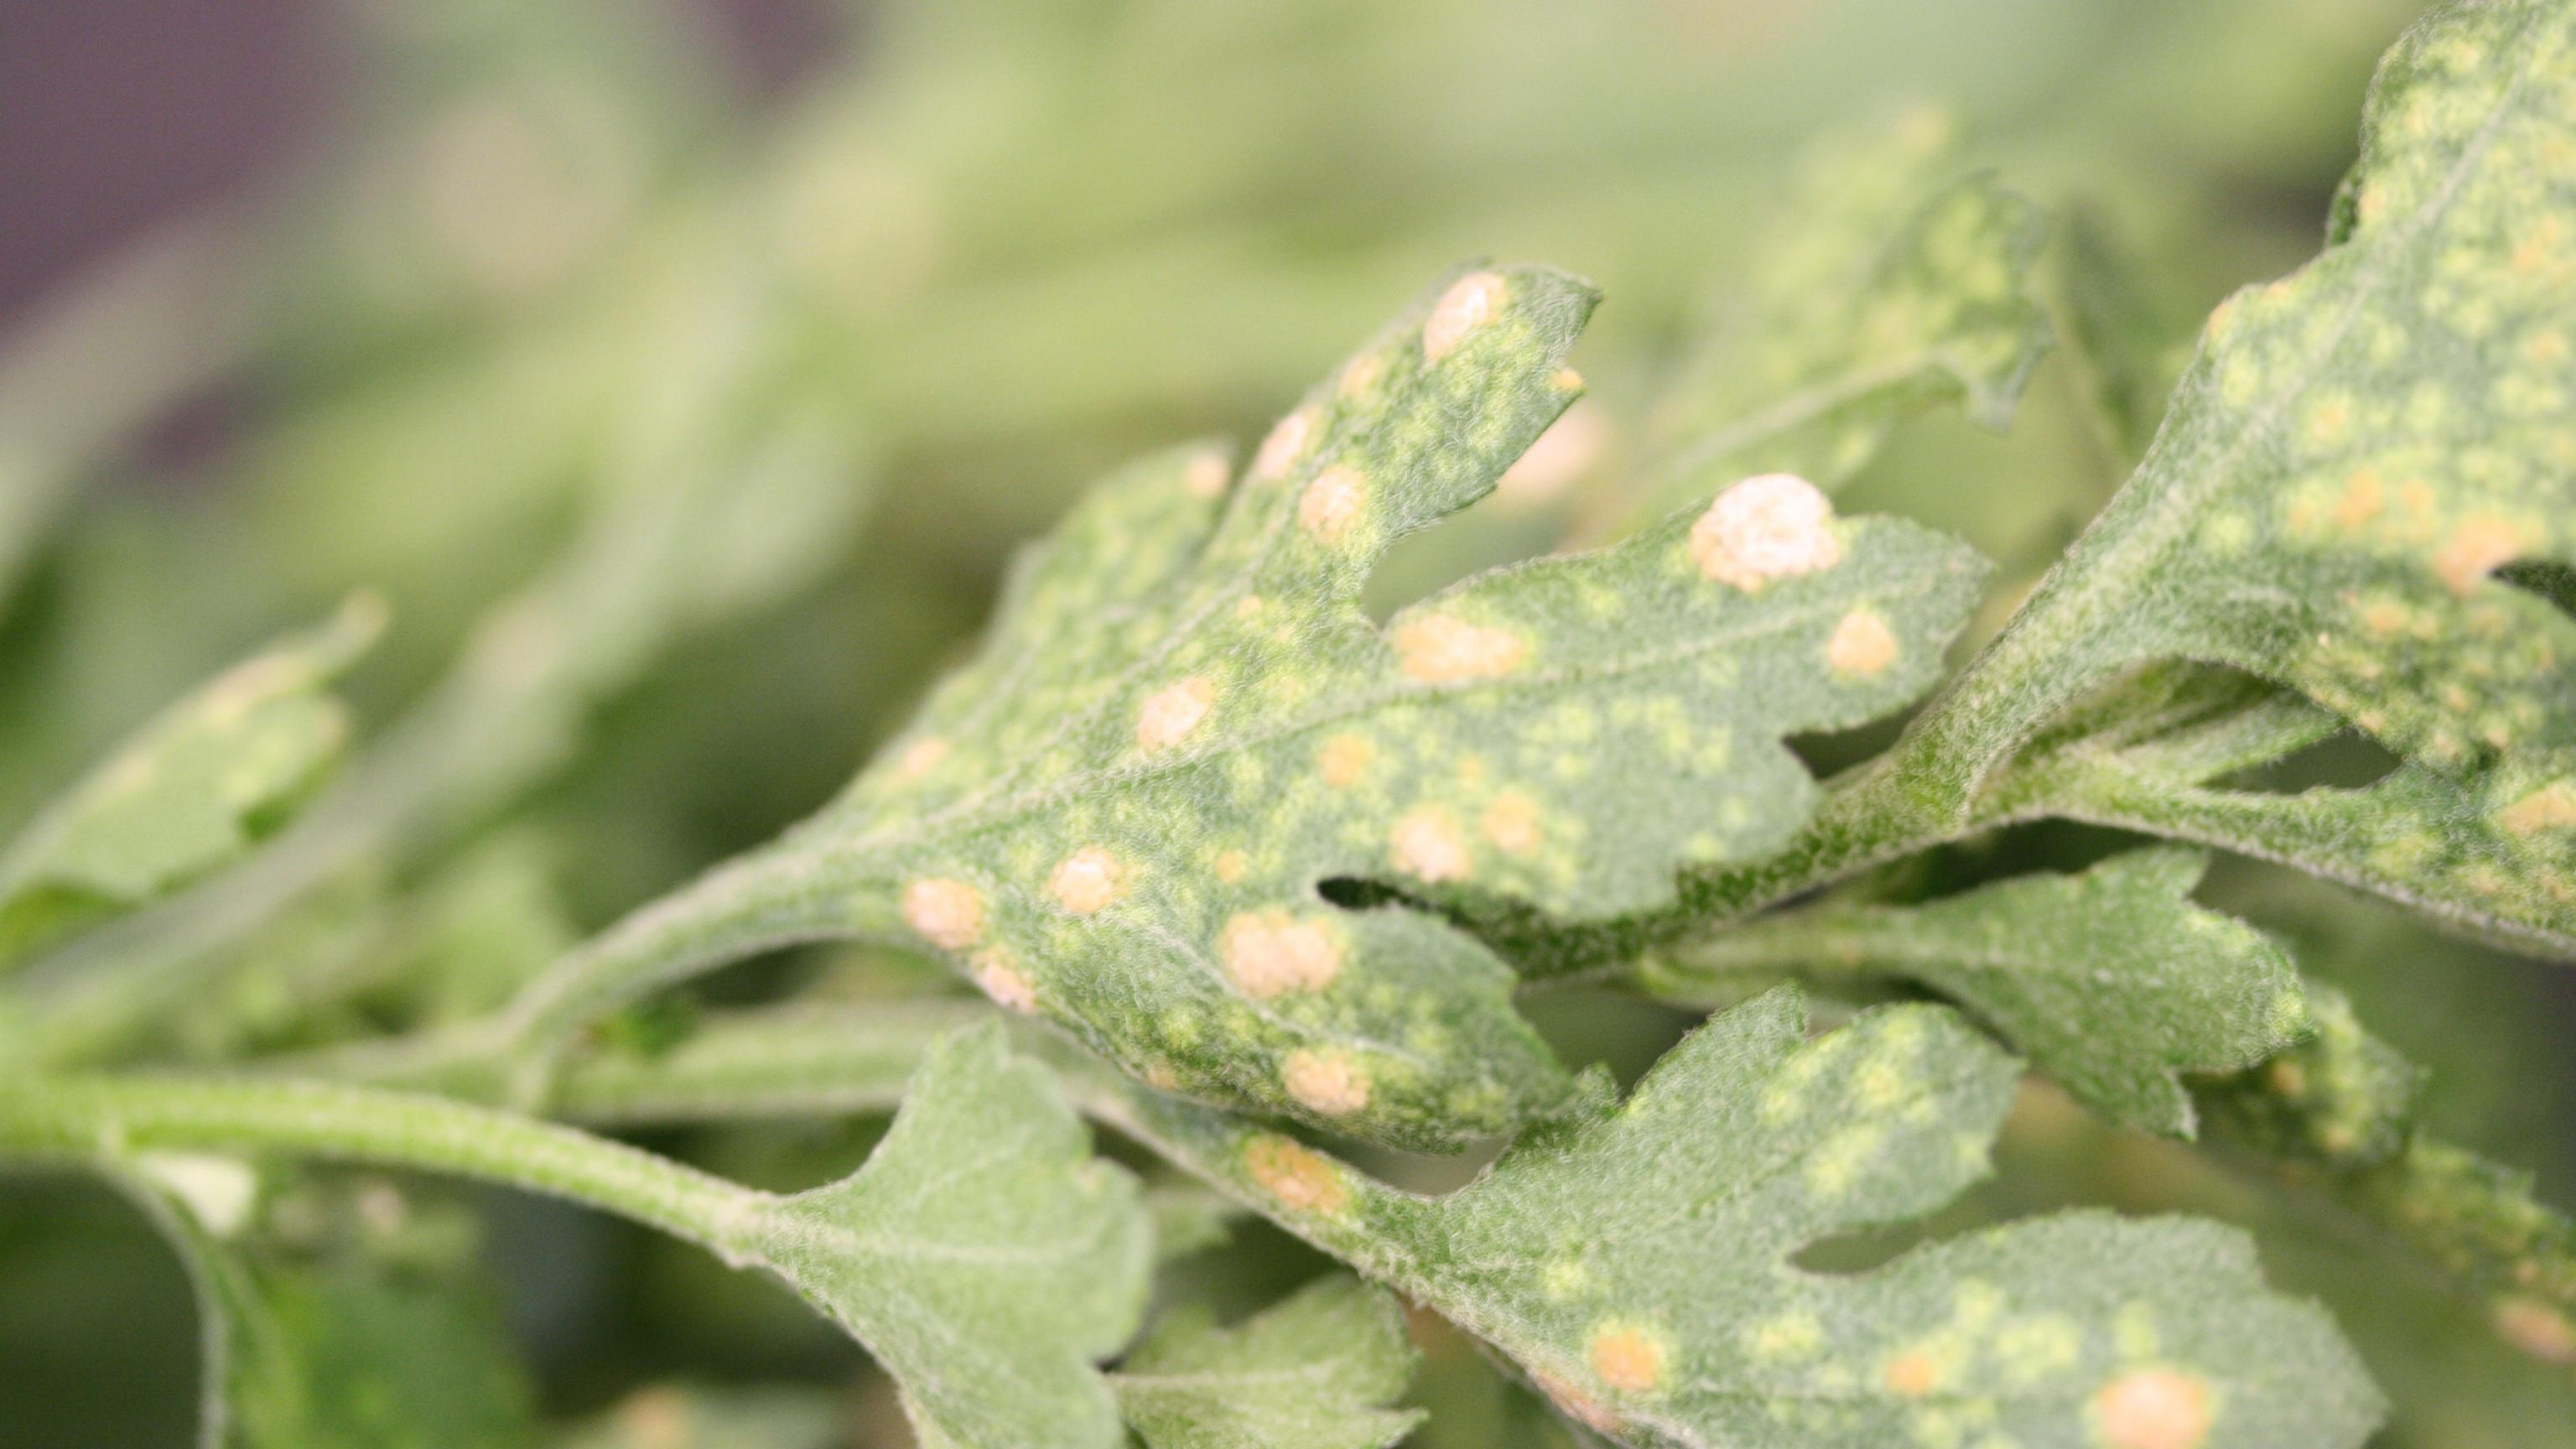 White and yellow spots on green chrysanthemum leaves.